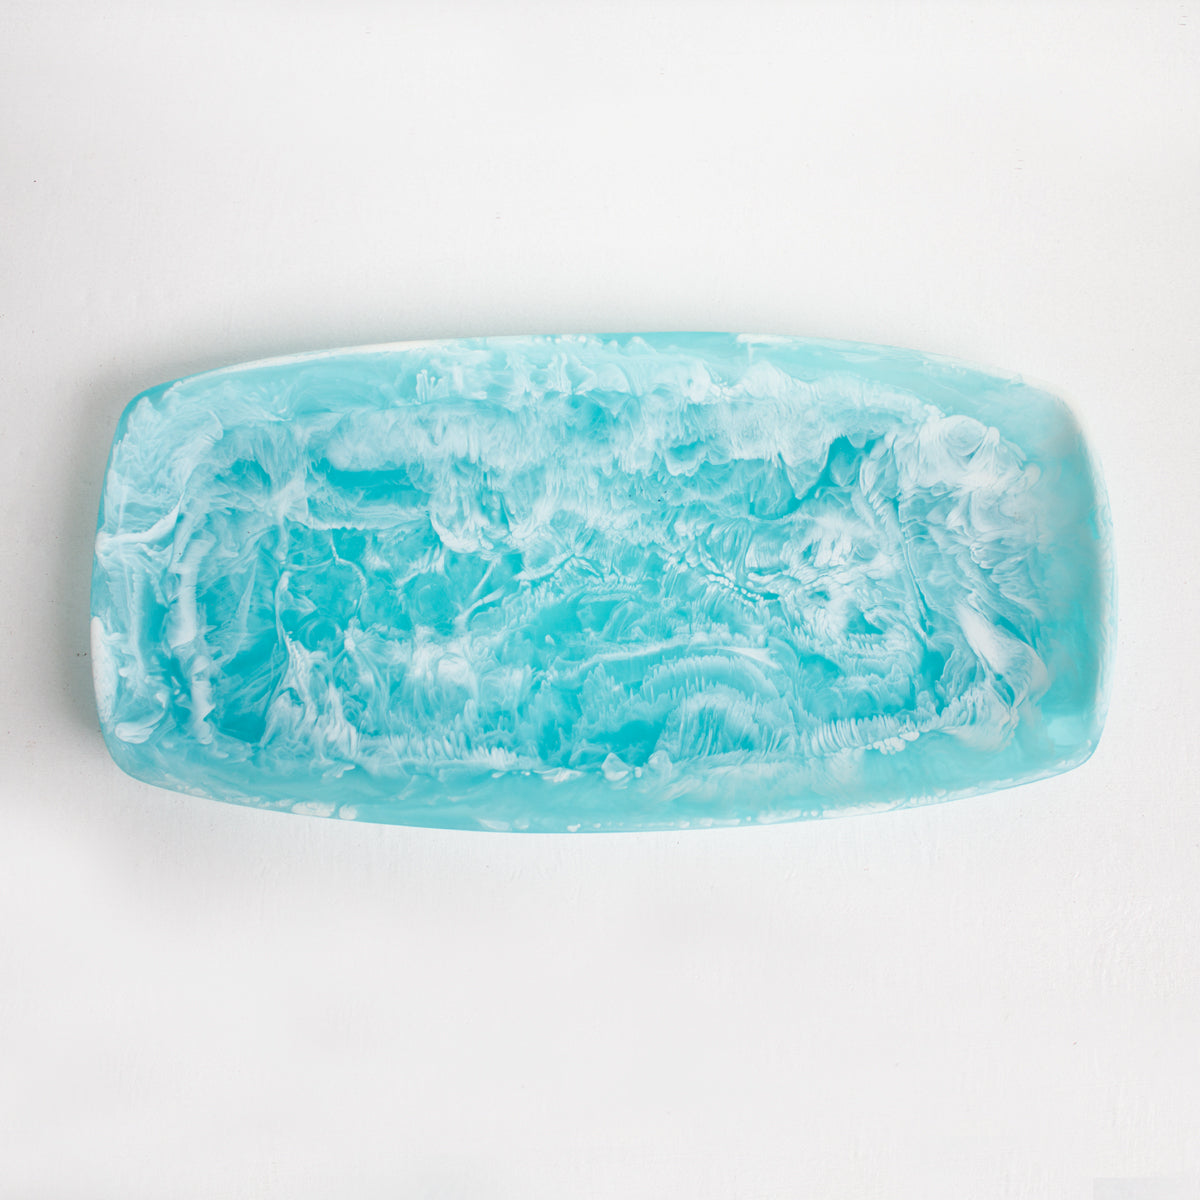 Serving Tray - Turquoise Blue